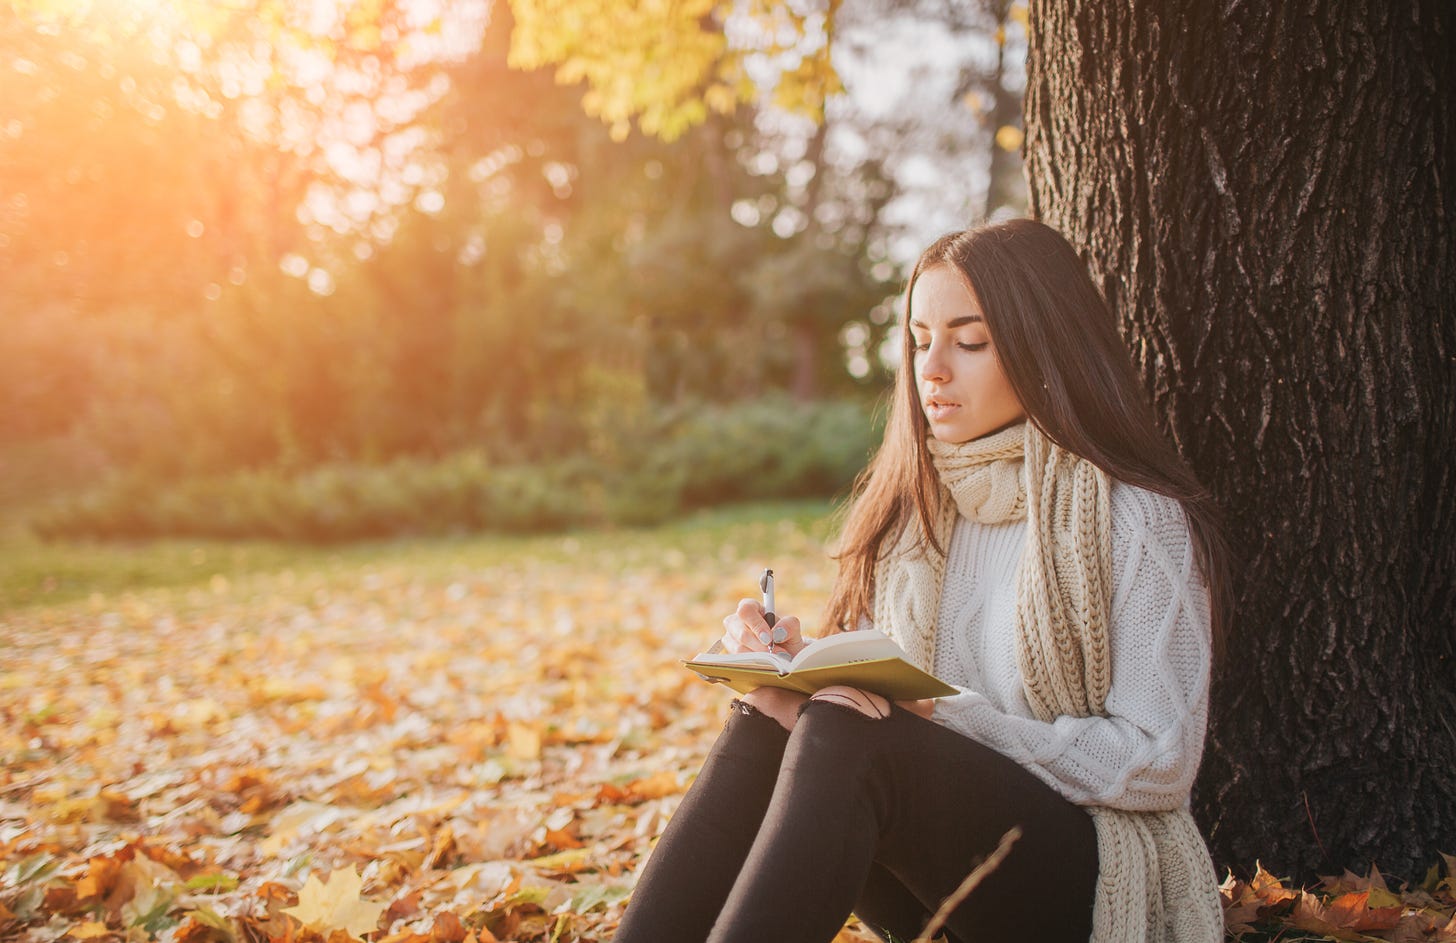 Girl sitting next to a tree writing in a journal